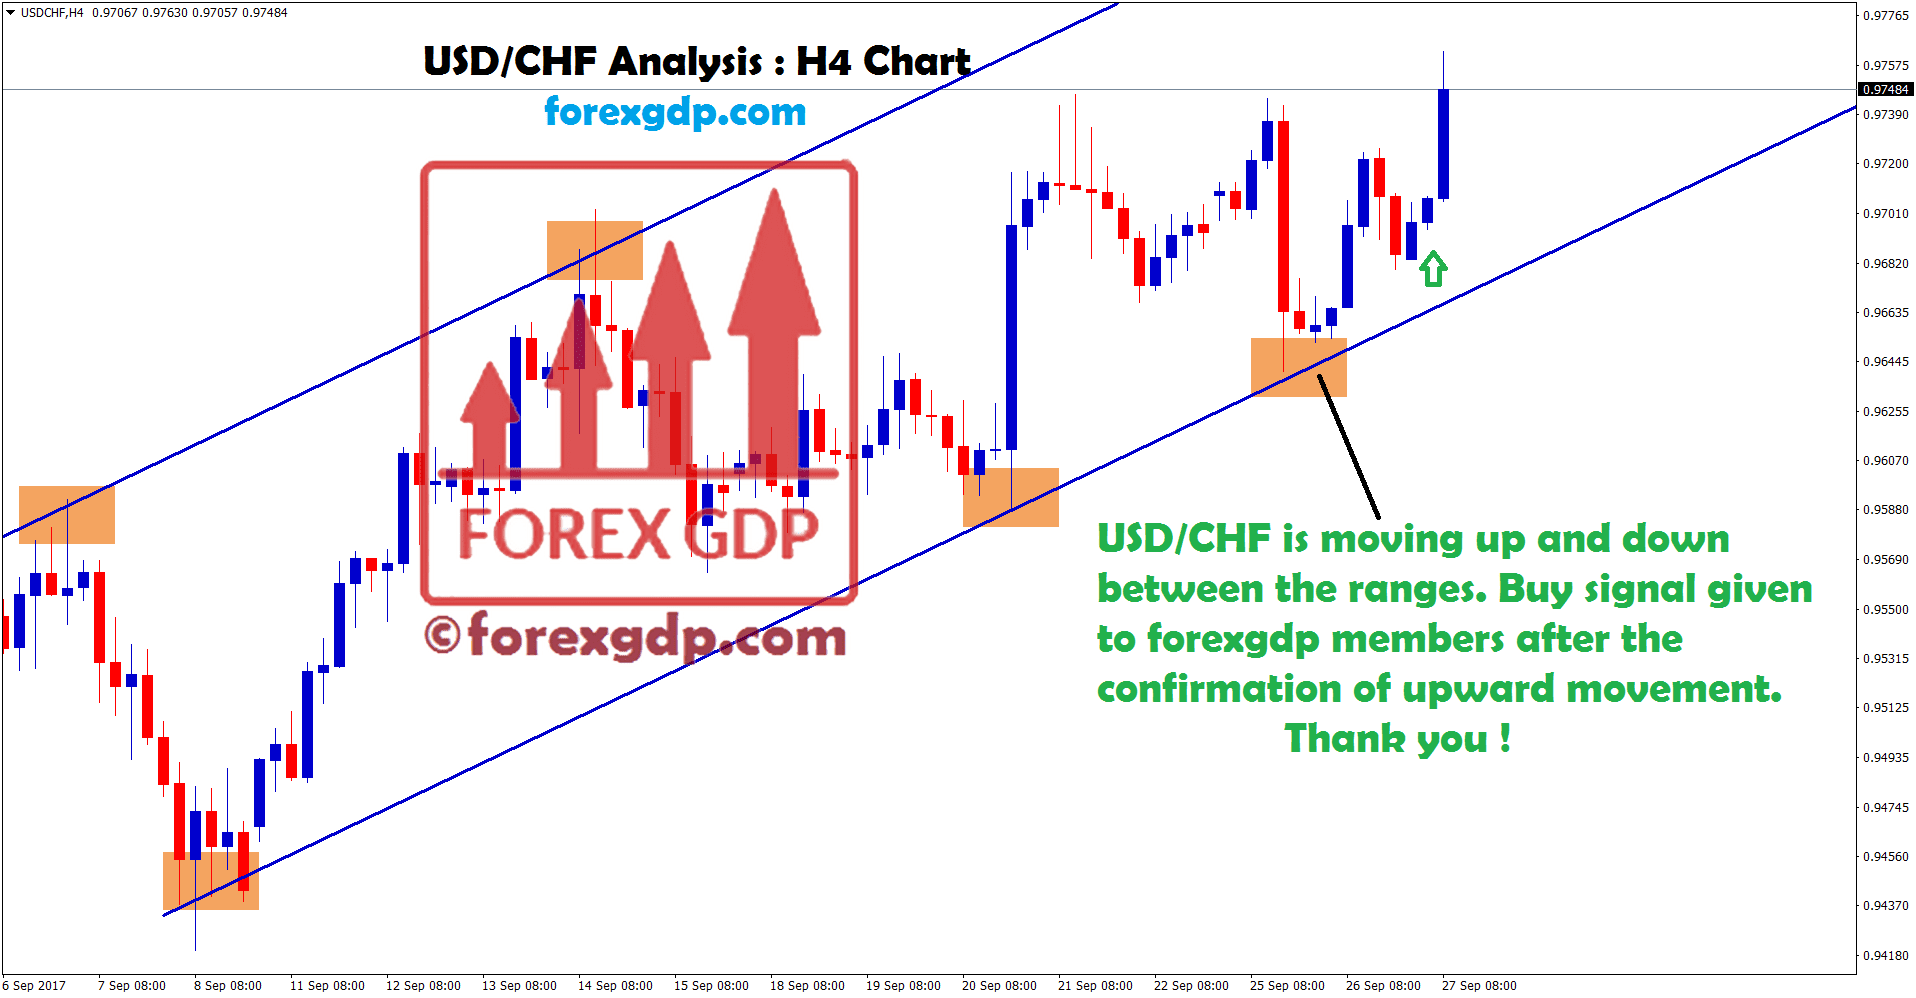 usdchf trend moving up forming higher high higher low